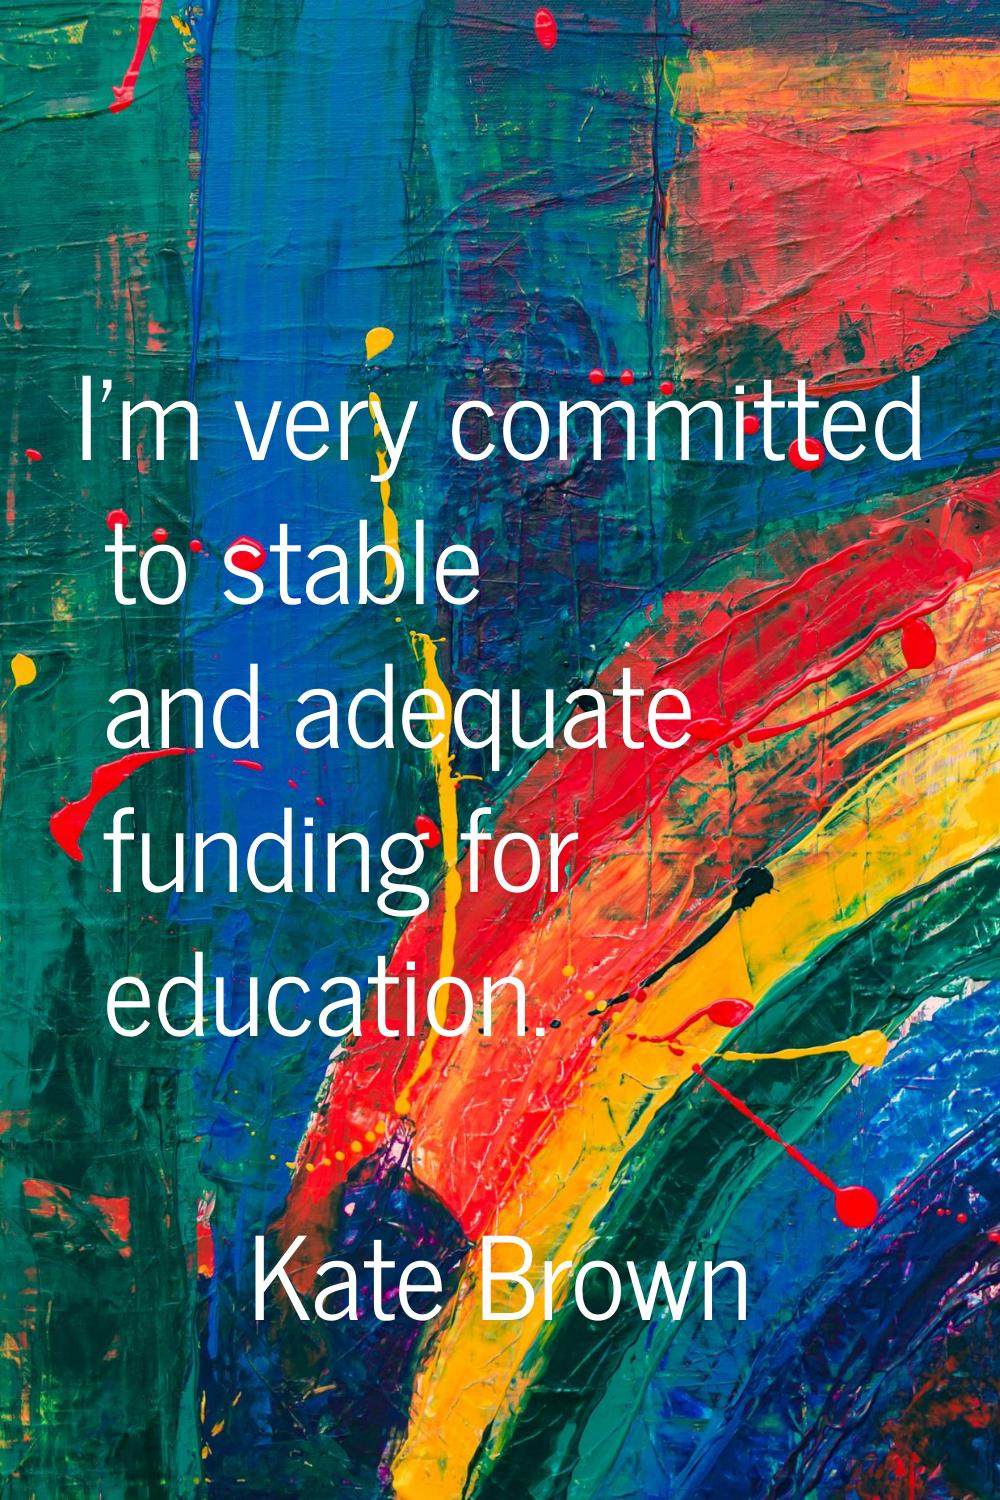 I'm very committed to stable and adequate funding for education.